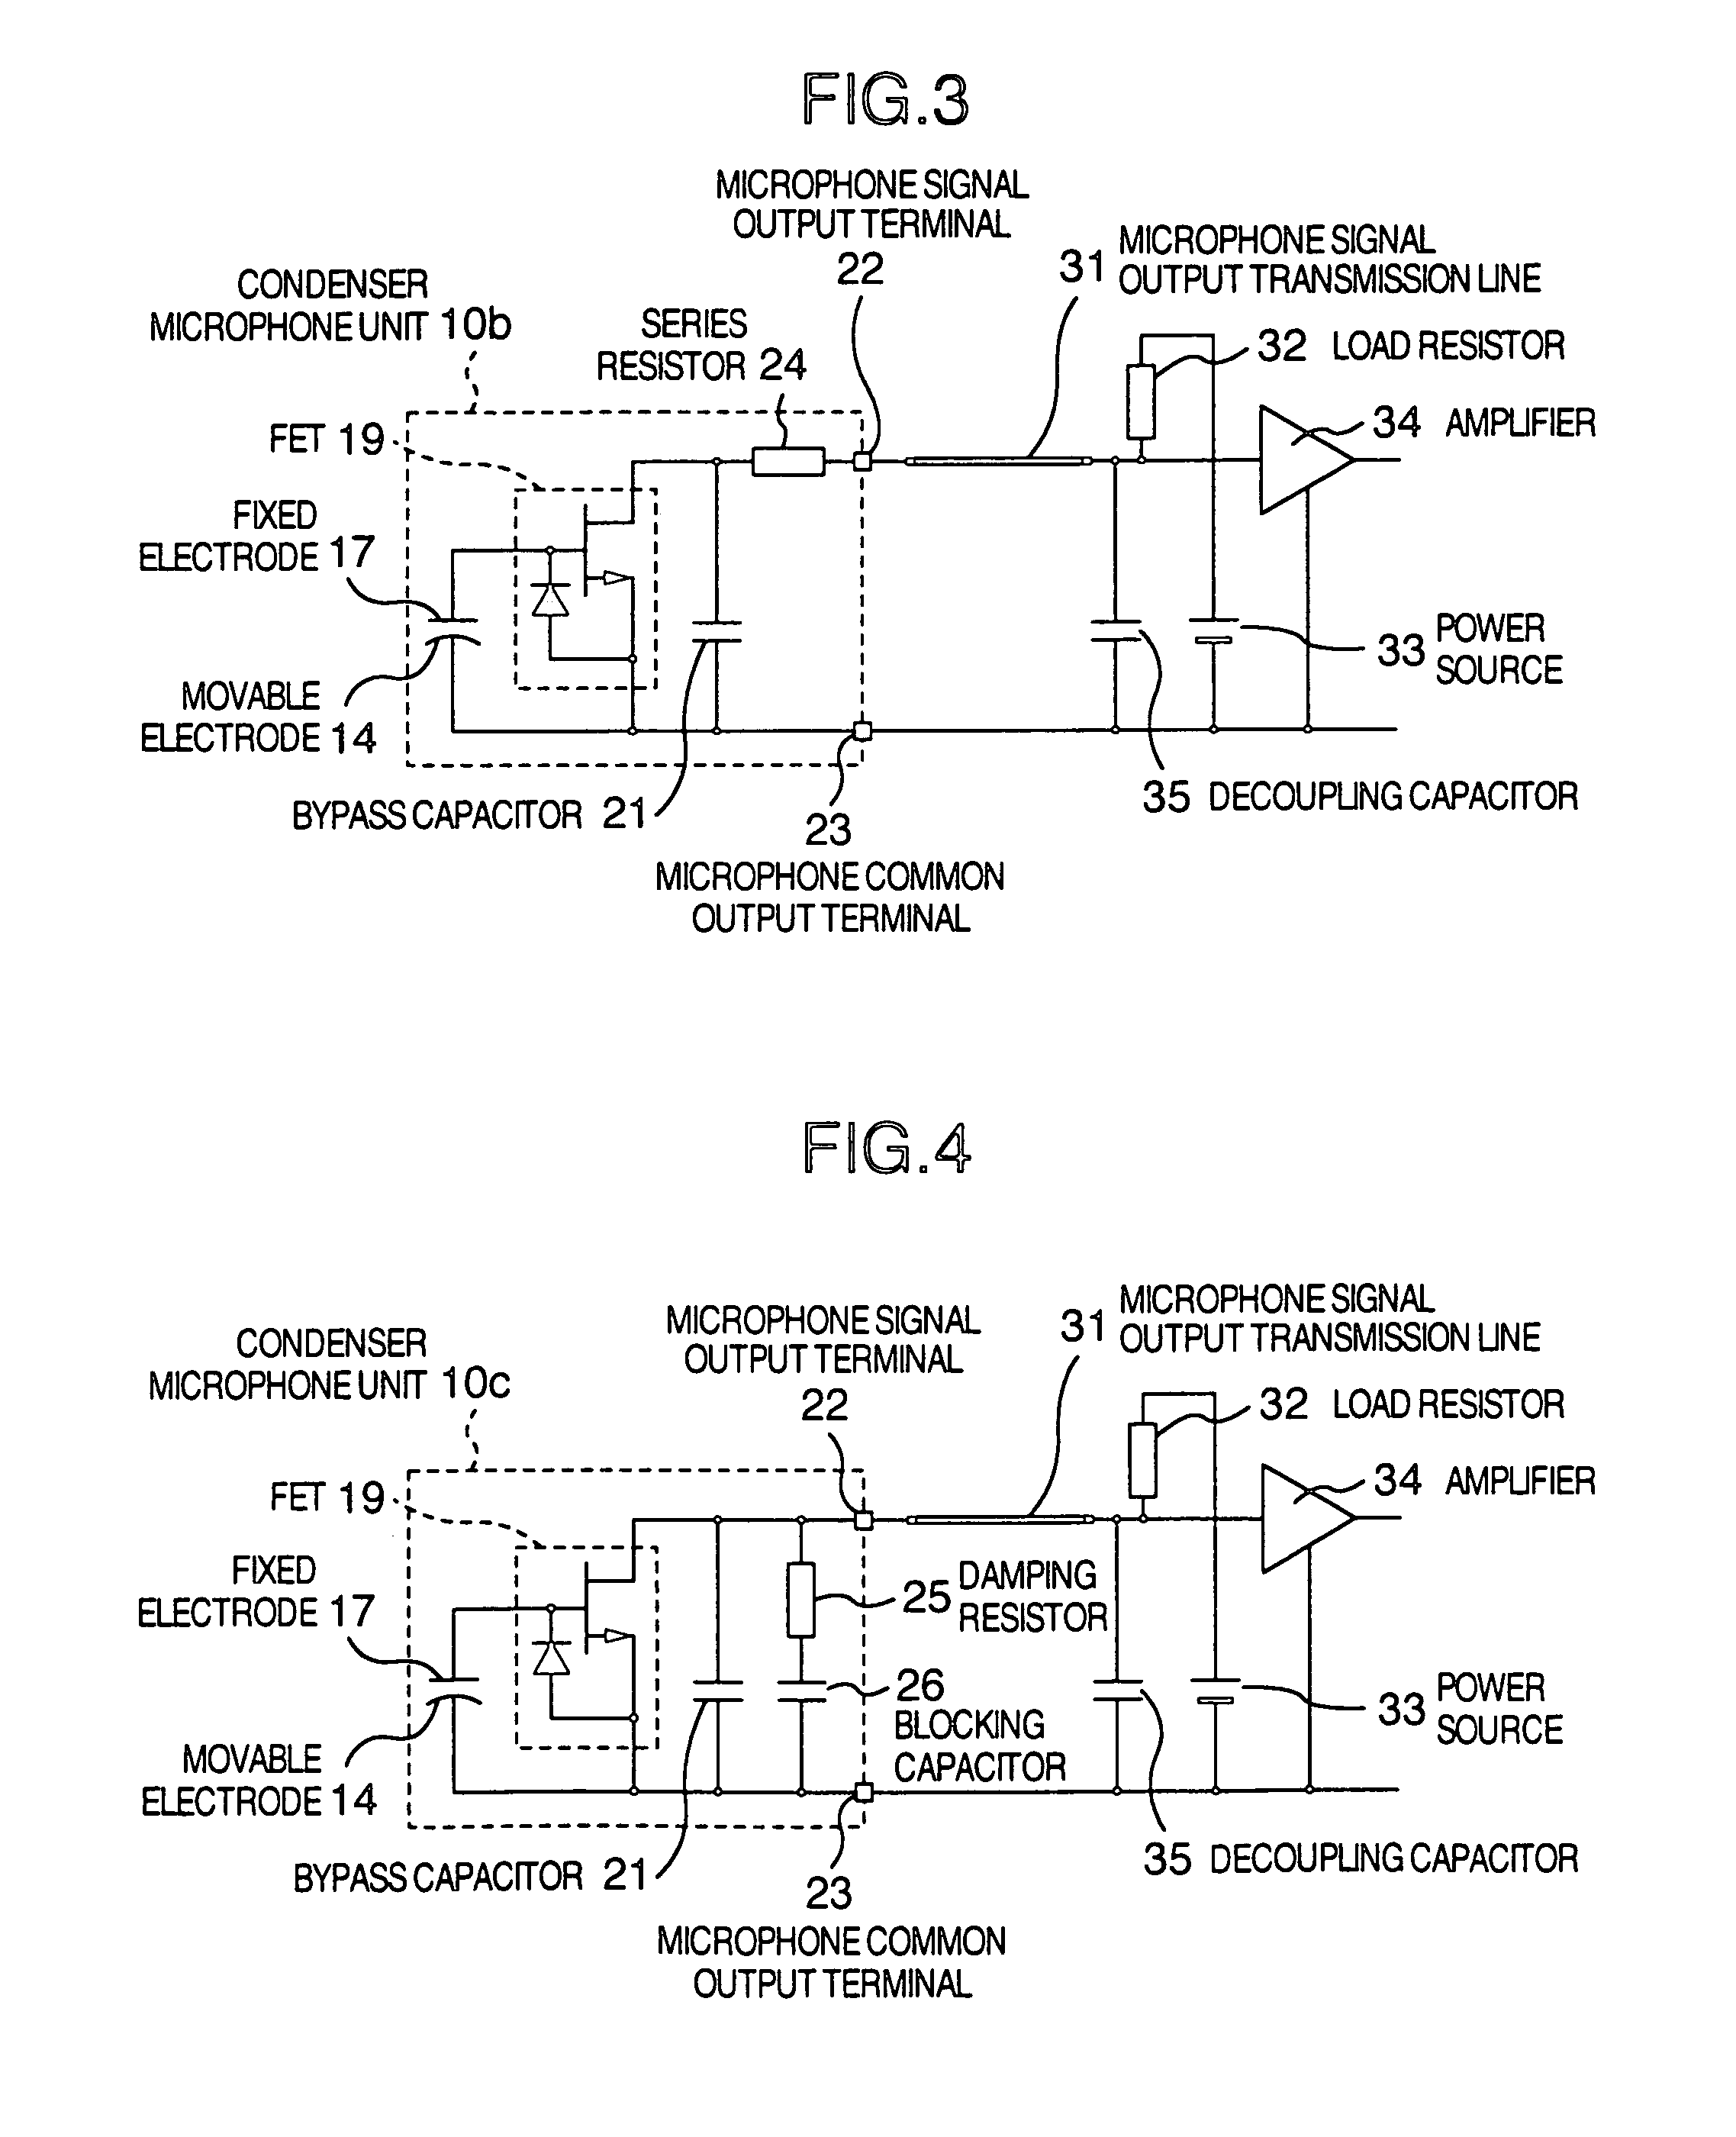 Condenser microphone apparatus and its connecting apparatus